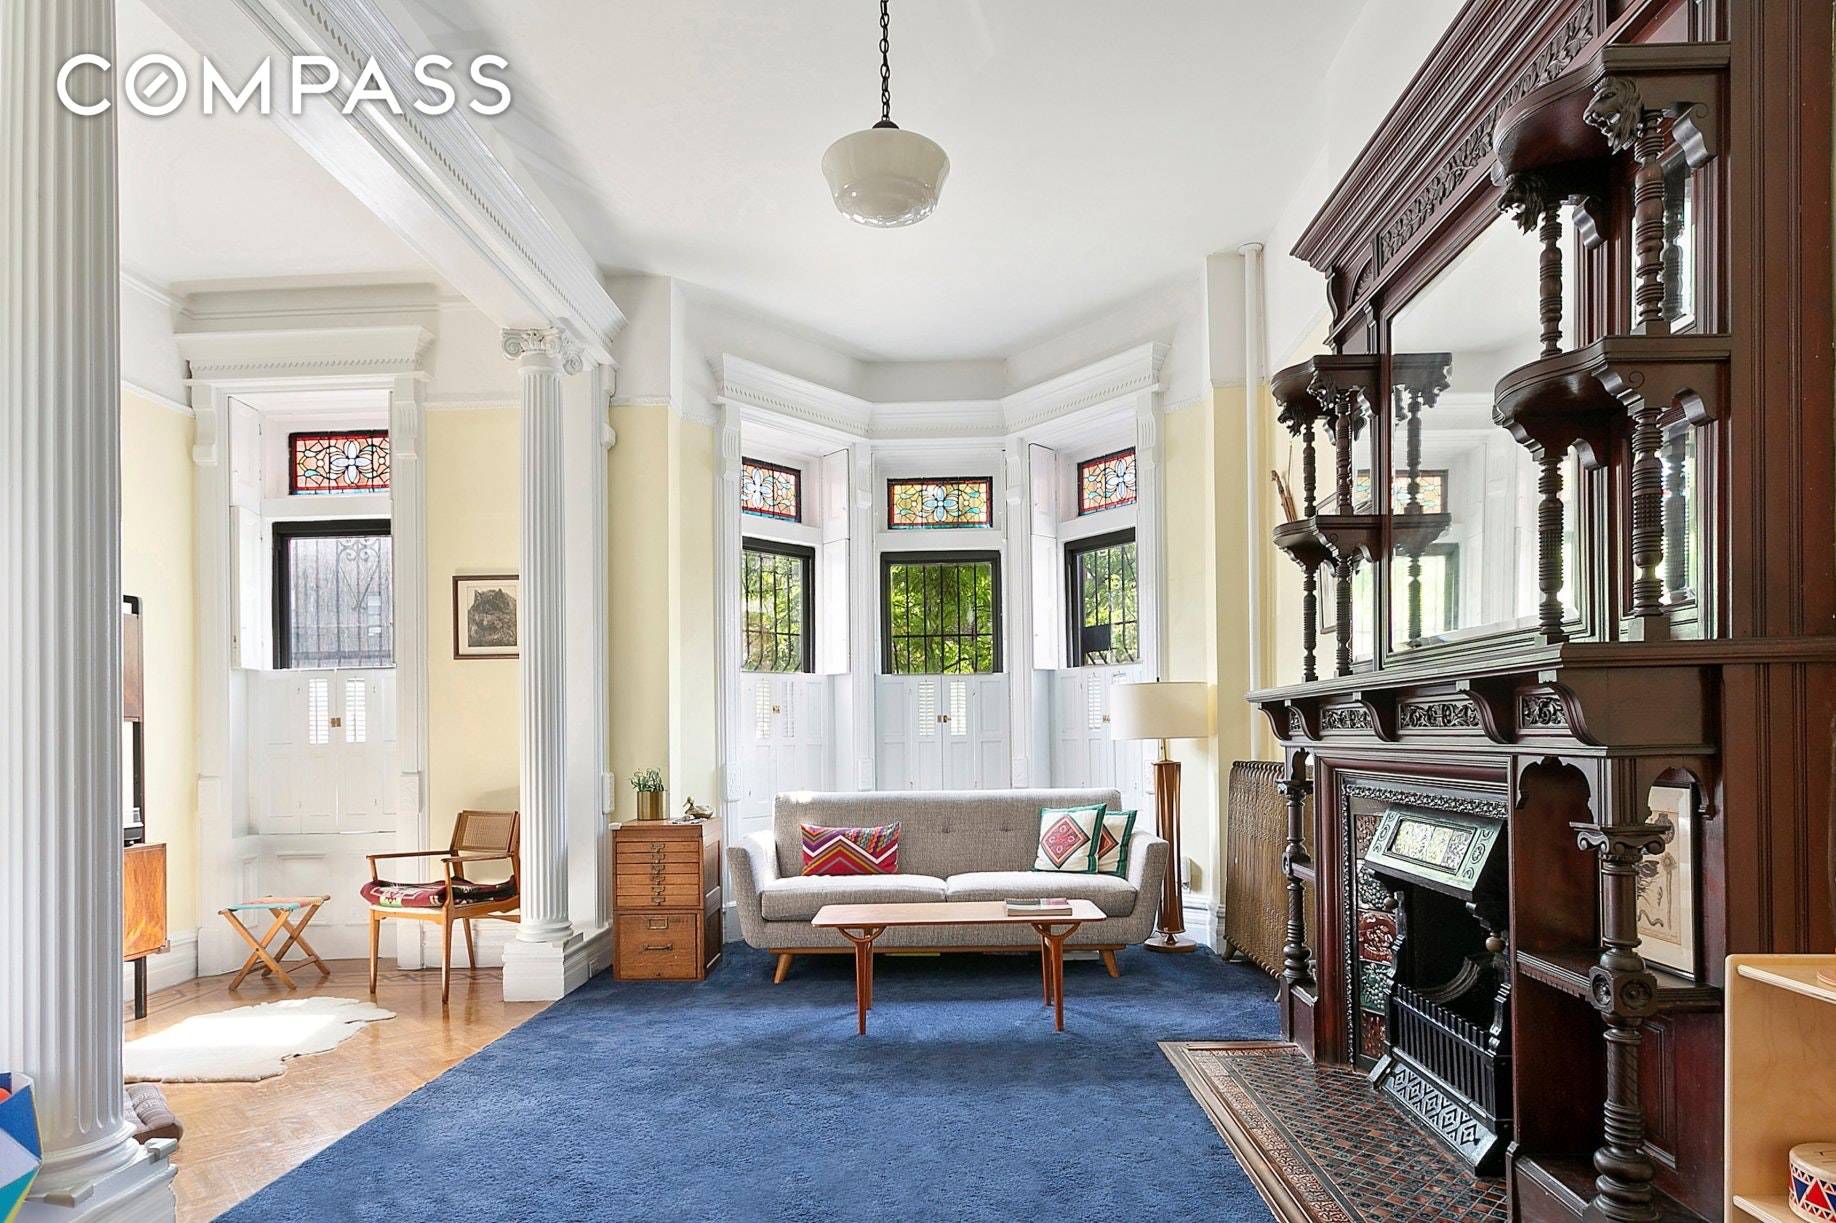 As featured in the NY Times and Brownstoner Please copy and paste URLs below to view articles At over 25' wide with soaring ceilings on each floor, 720 4th Avenue ...